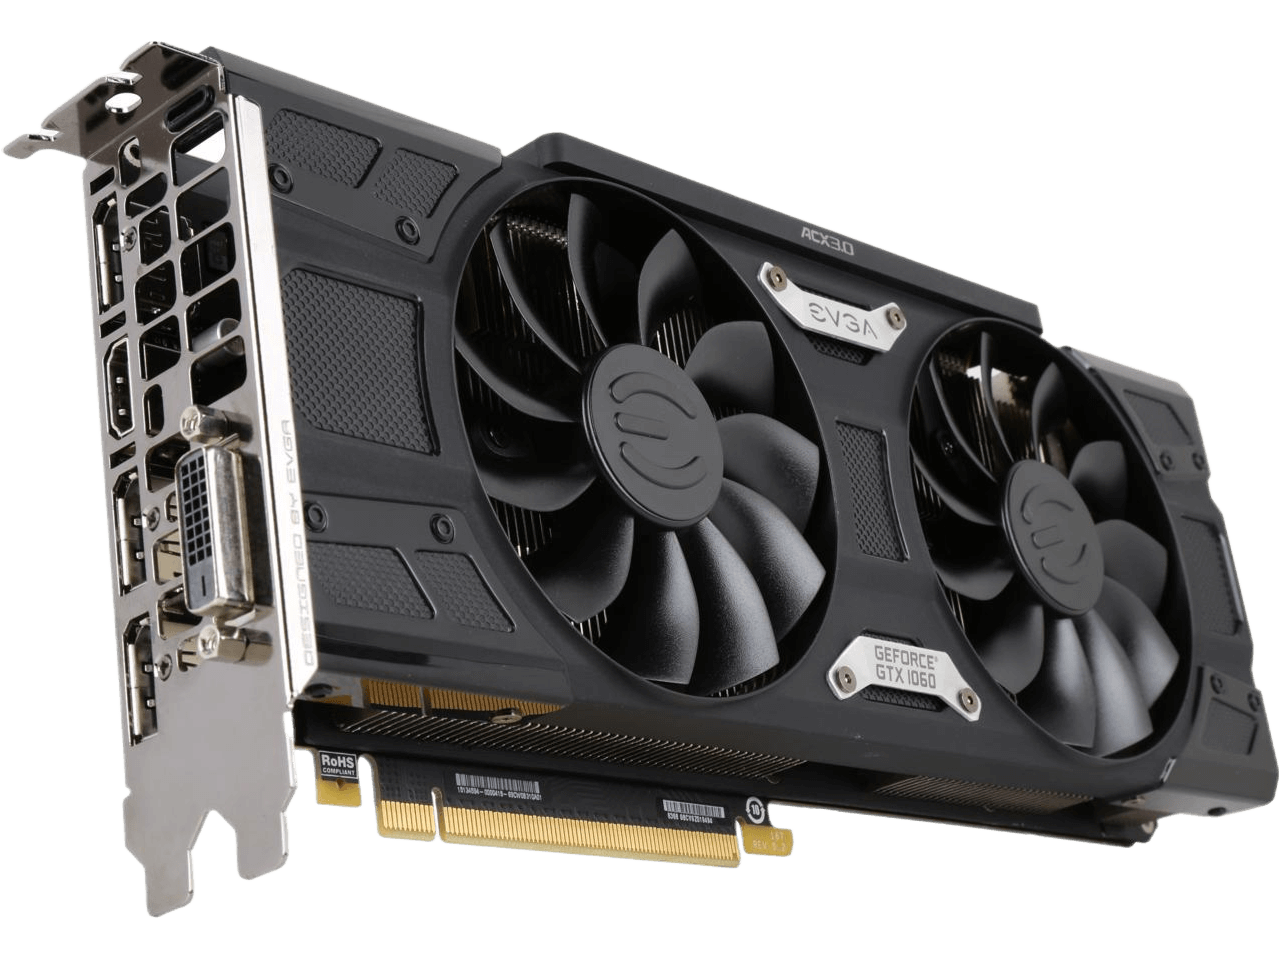 EVGA GeForce GTX 1060 3GB SSC GAMING 3GB GDDR5 ACX 3.0 LED DX12 OSD Support (PXOC) Video Graphics Card 03G-P4-6167-KR